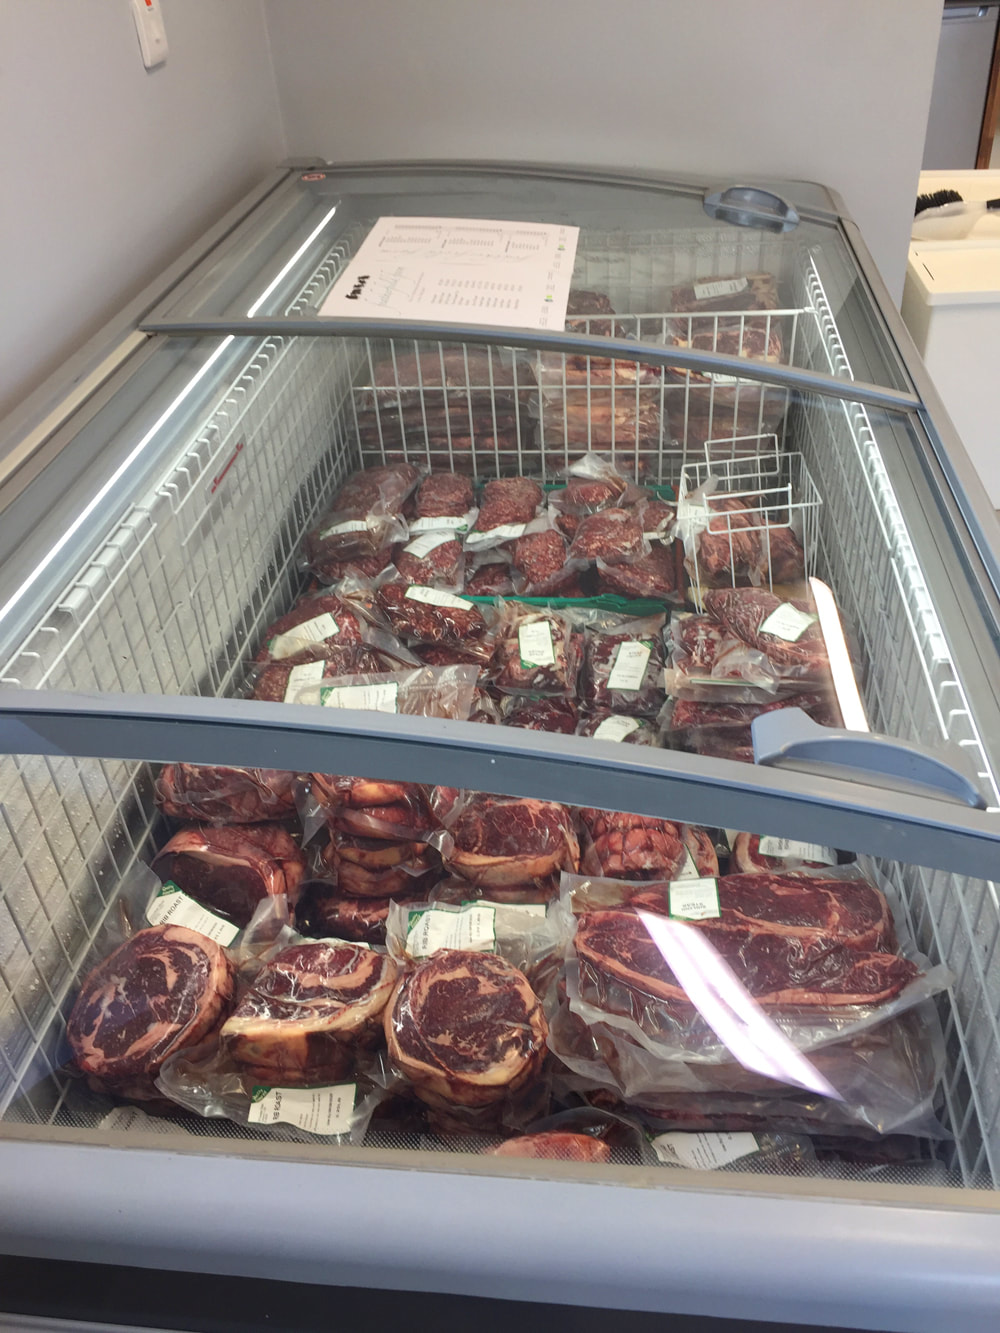 Picture frozen beef for sale in display freezer